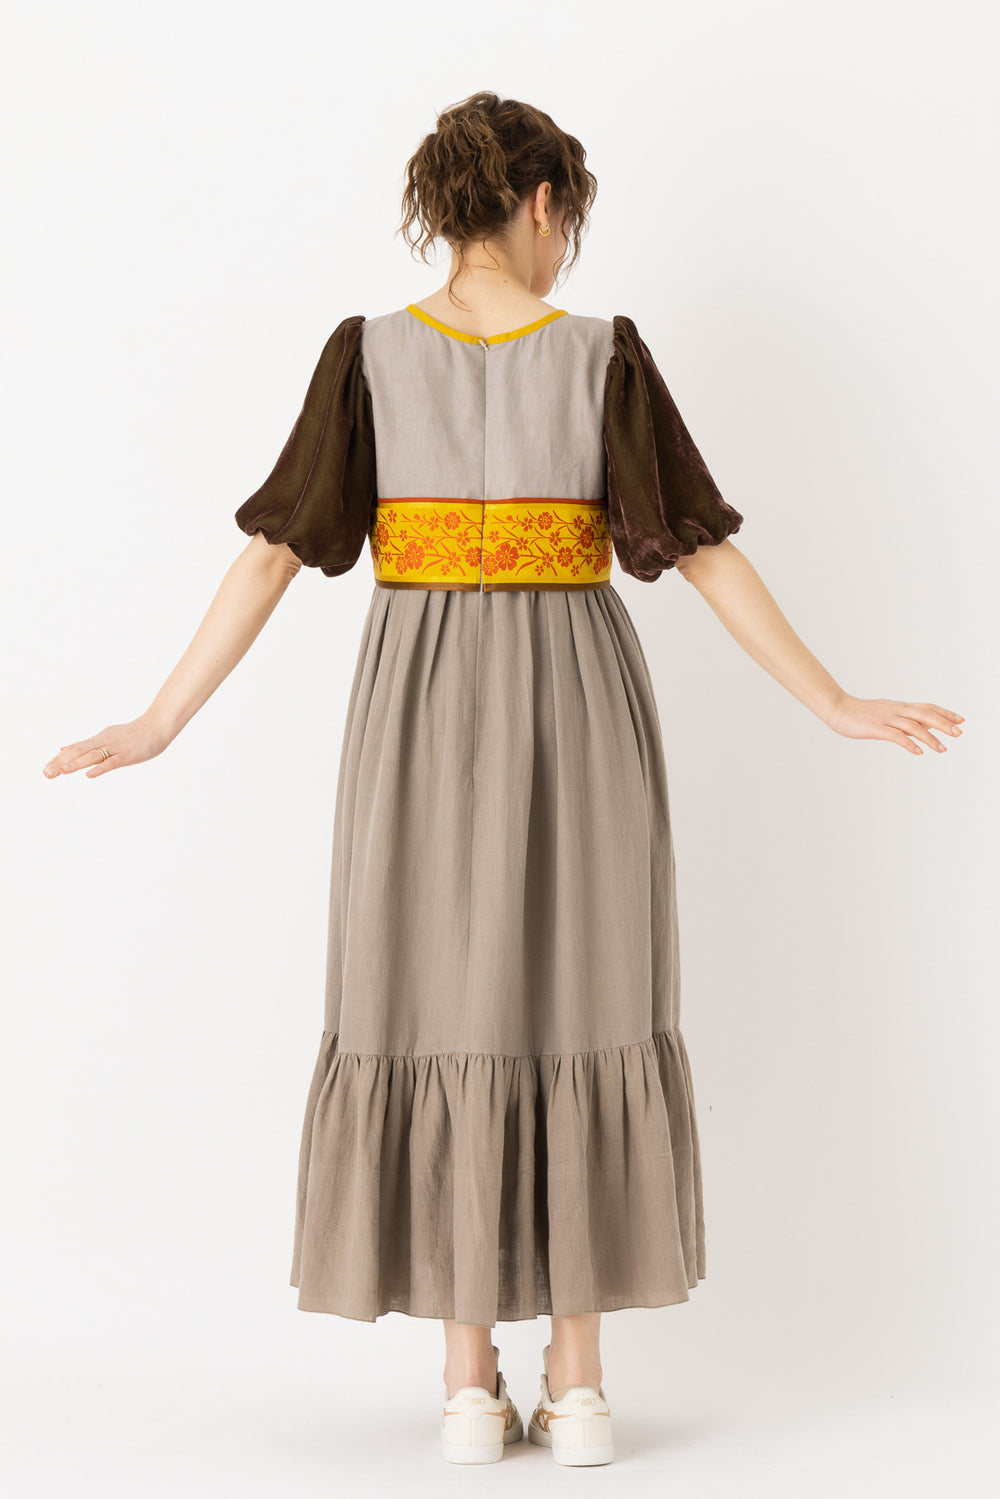 A woman is wearing an empire dress with a classic empire waist, showcasing an empire style dress. This empire waist dress is quite long, making it an example of a high waist maxi dress. This high waist dress enhances her figure. This maxi empire dress exudes sophistication and elegance making it ideal for a formal occasion or a leisurely evening out.